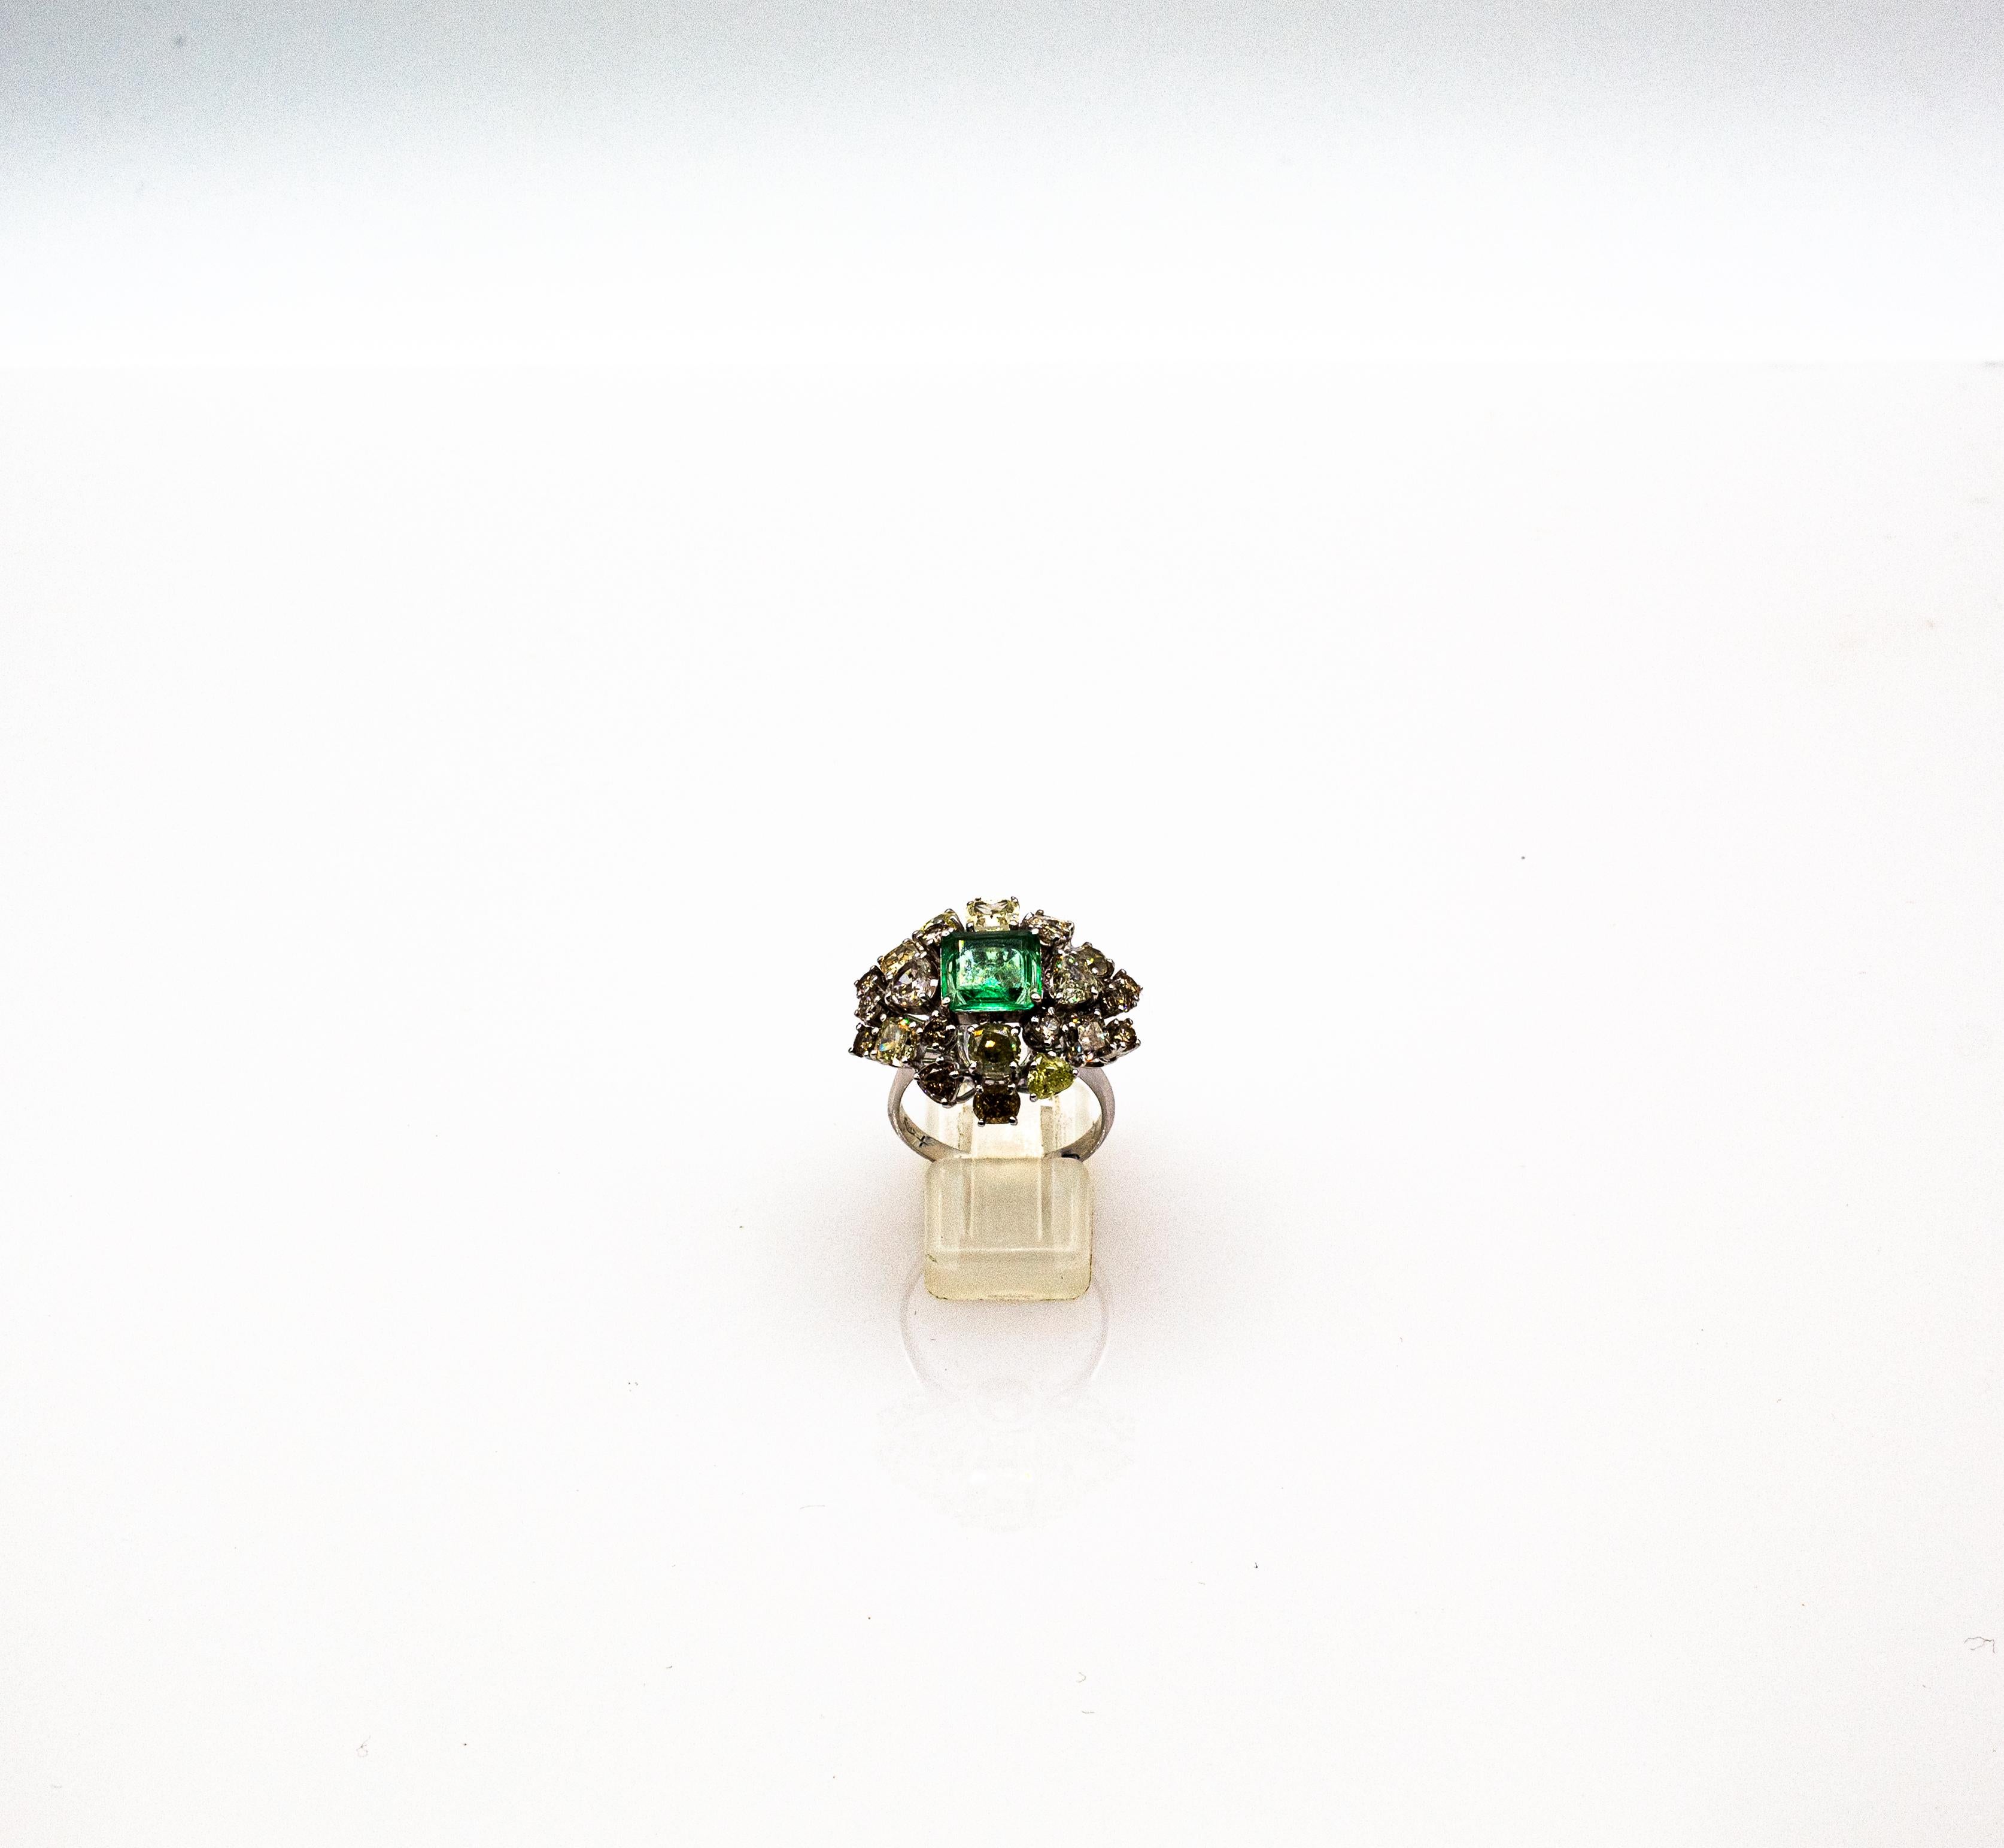 This Ring is made of 18K White Gold.
This Ring has 5.20 Carats of White, Yellow and Brown Pear Cut, Cushion Cut, Old European Cut, Oval Cut Modern Round Cut Diamonds.
This Ring has a 2.80 Carats Natural Brazil Emerald Cut Emerald.
This Ring is